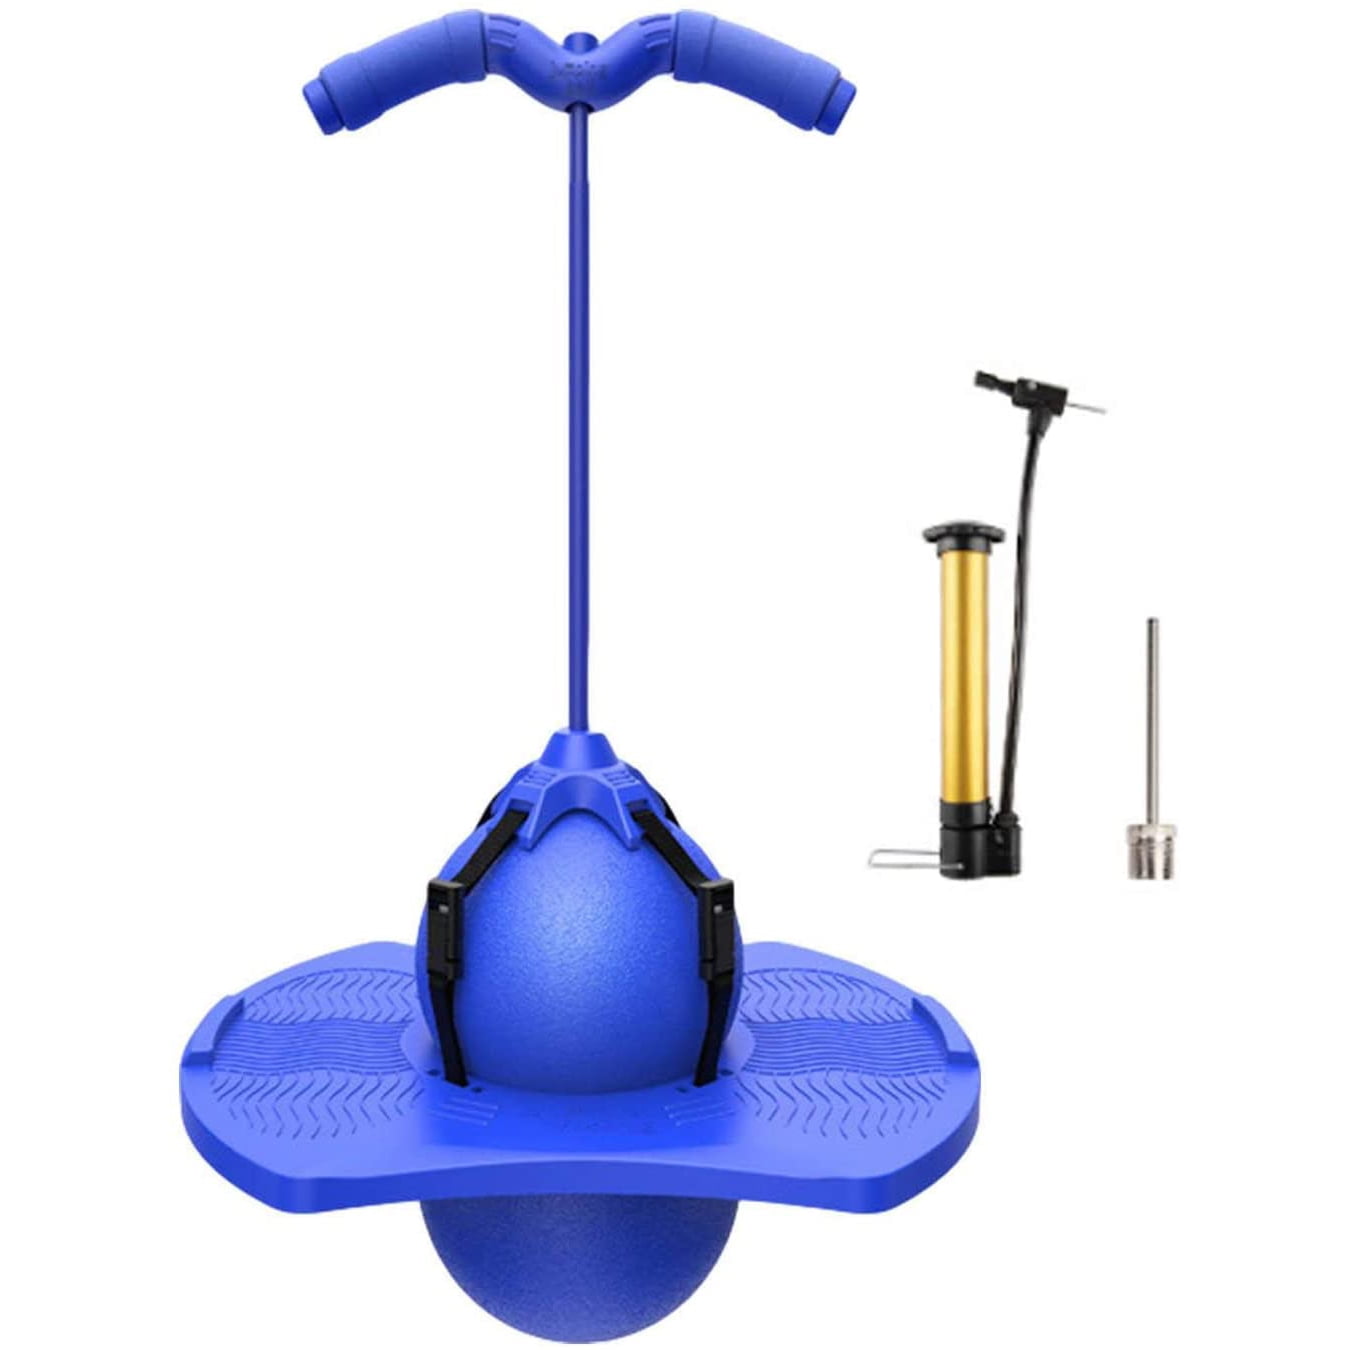 Pogo Bouncing Ball,Pogo Jumper Pogo Stick with Handle and Ball Pump Abrasion-resistant High Jump Toy Sports Game for Children and Teenagers